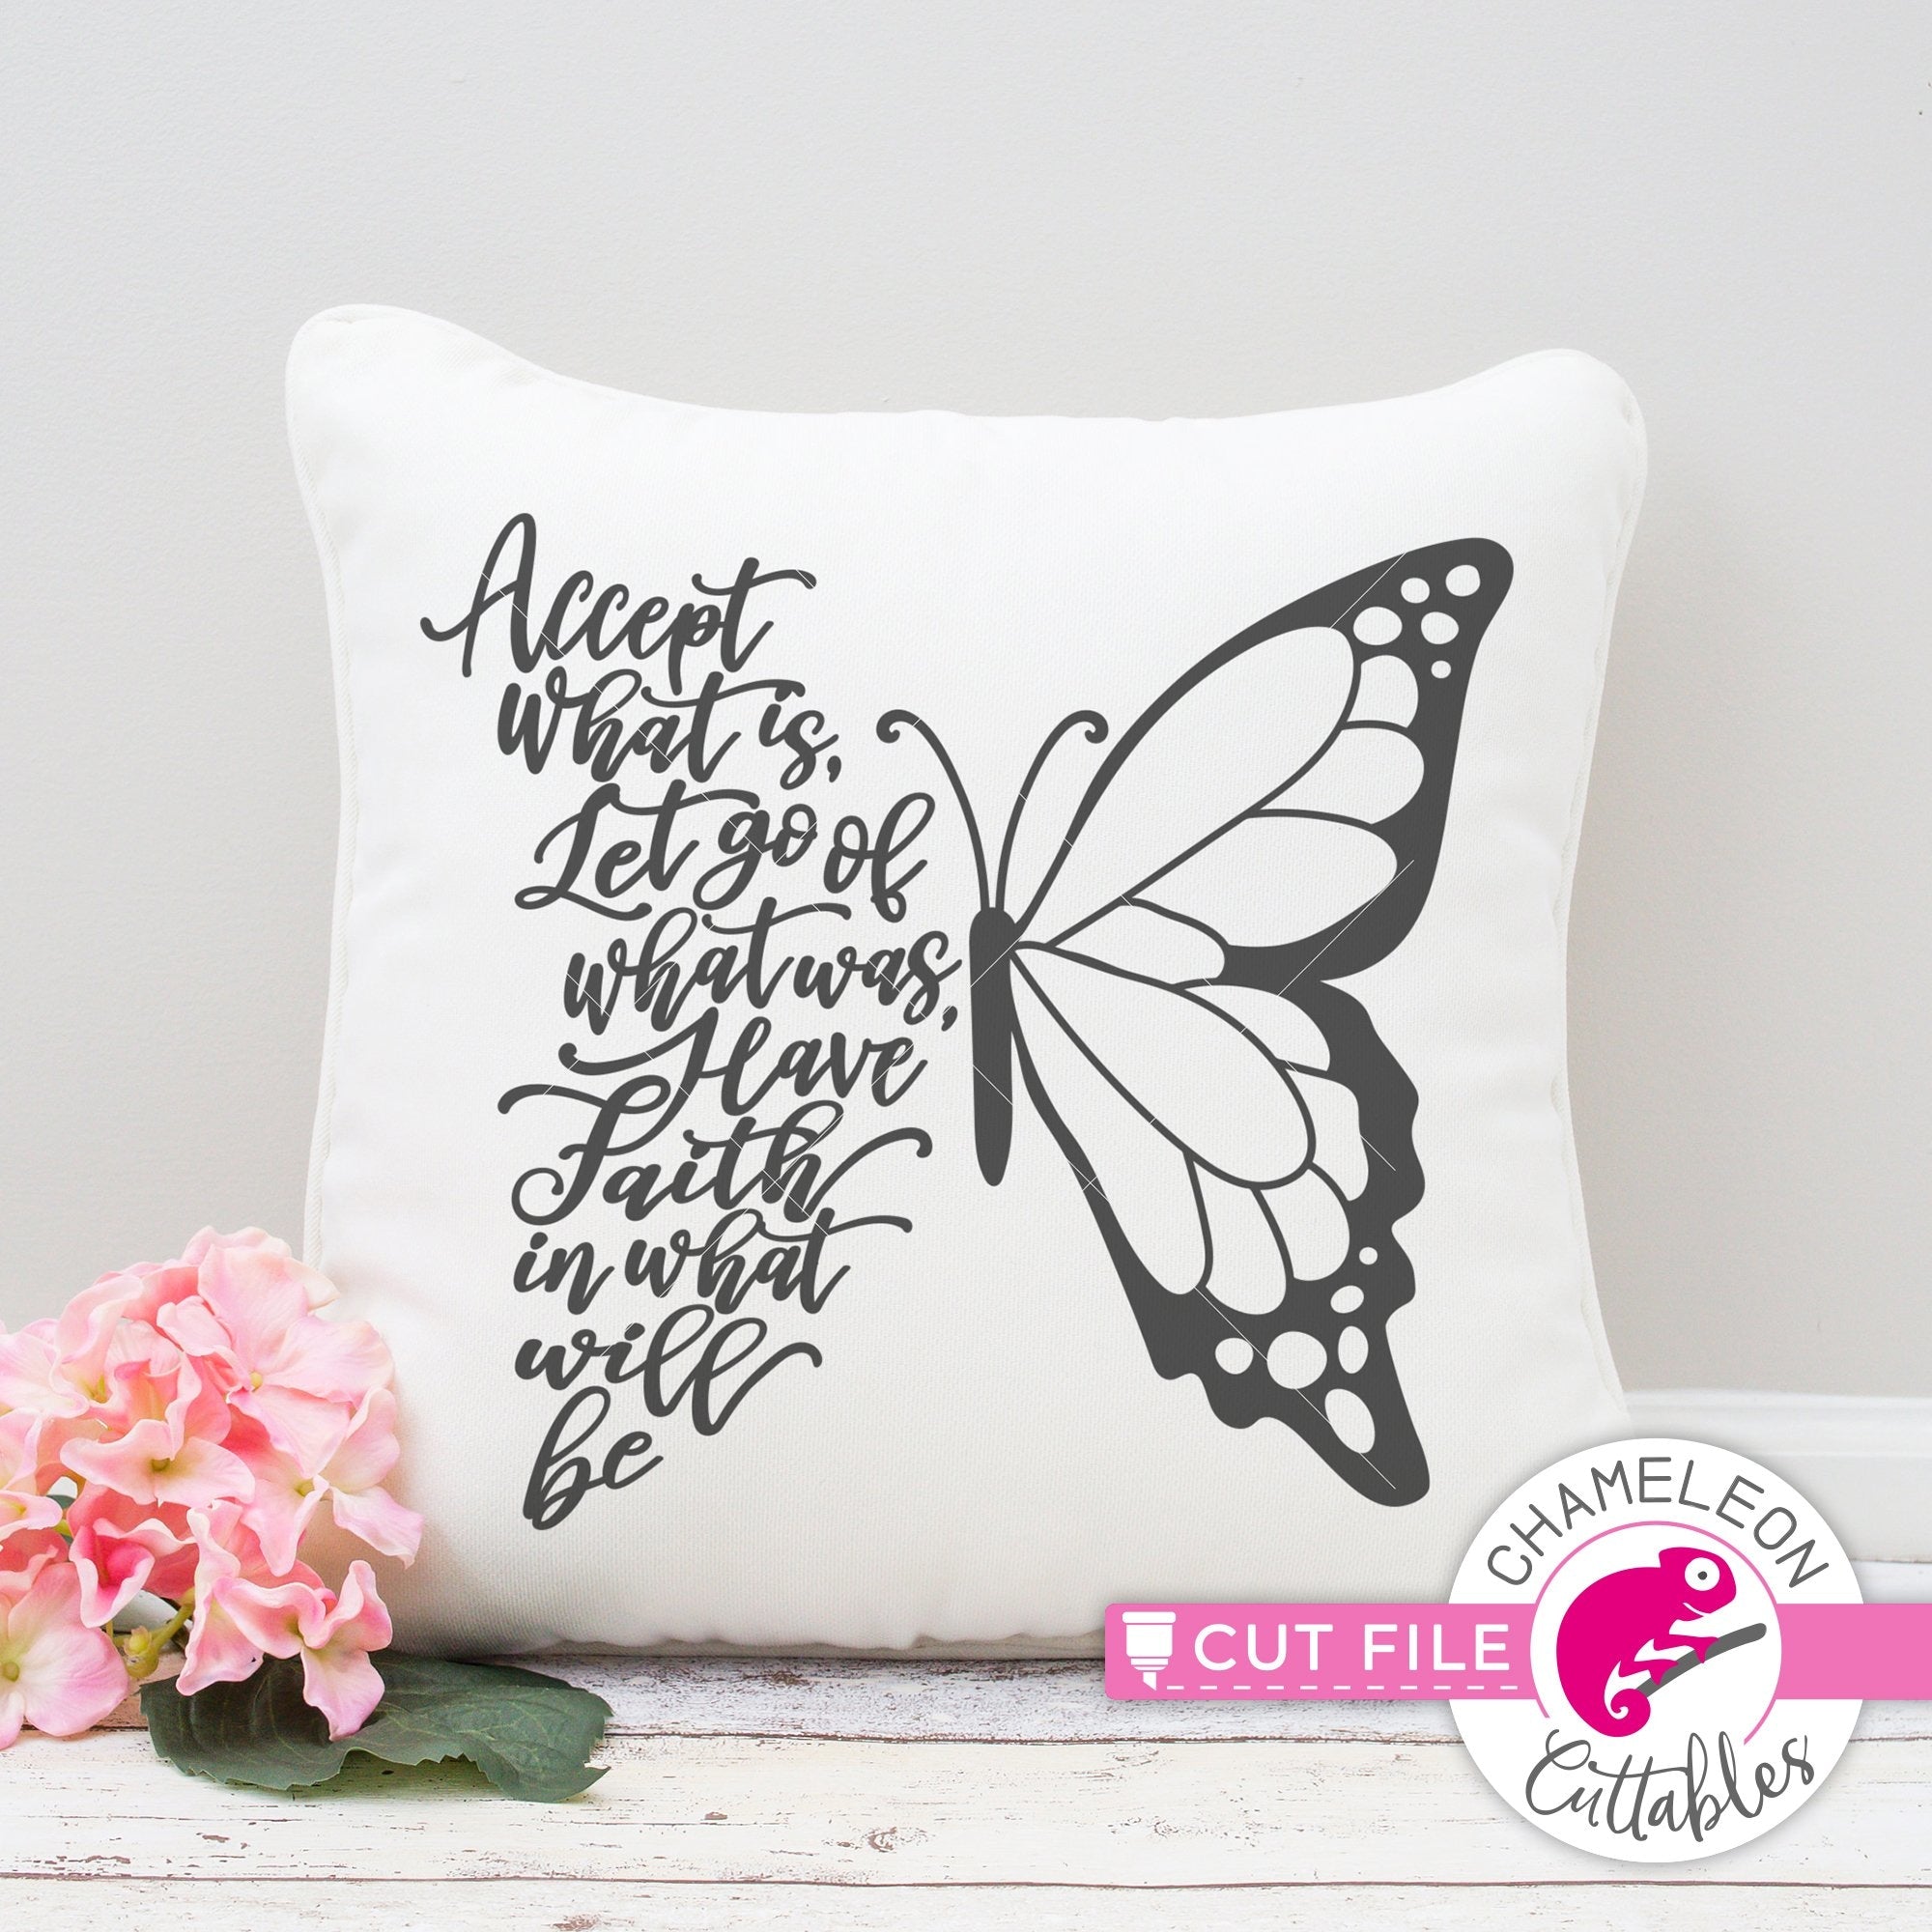 Download Accept What Is Let Go Of What Was Have Faith In What Will Be Butterfly Svg Png Dxf Eps Jpeg Chameleon Cuttables Llc